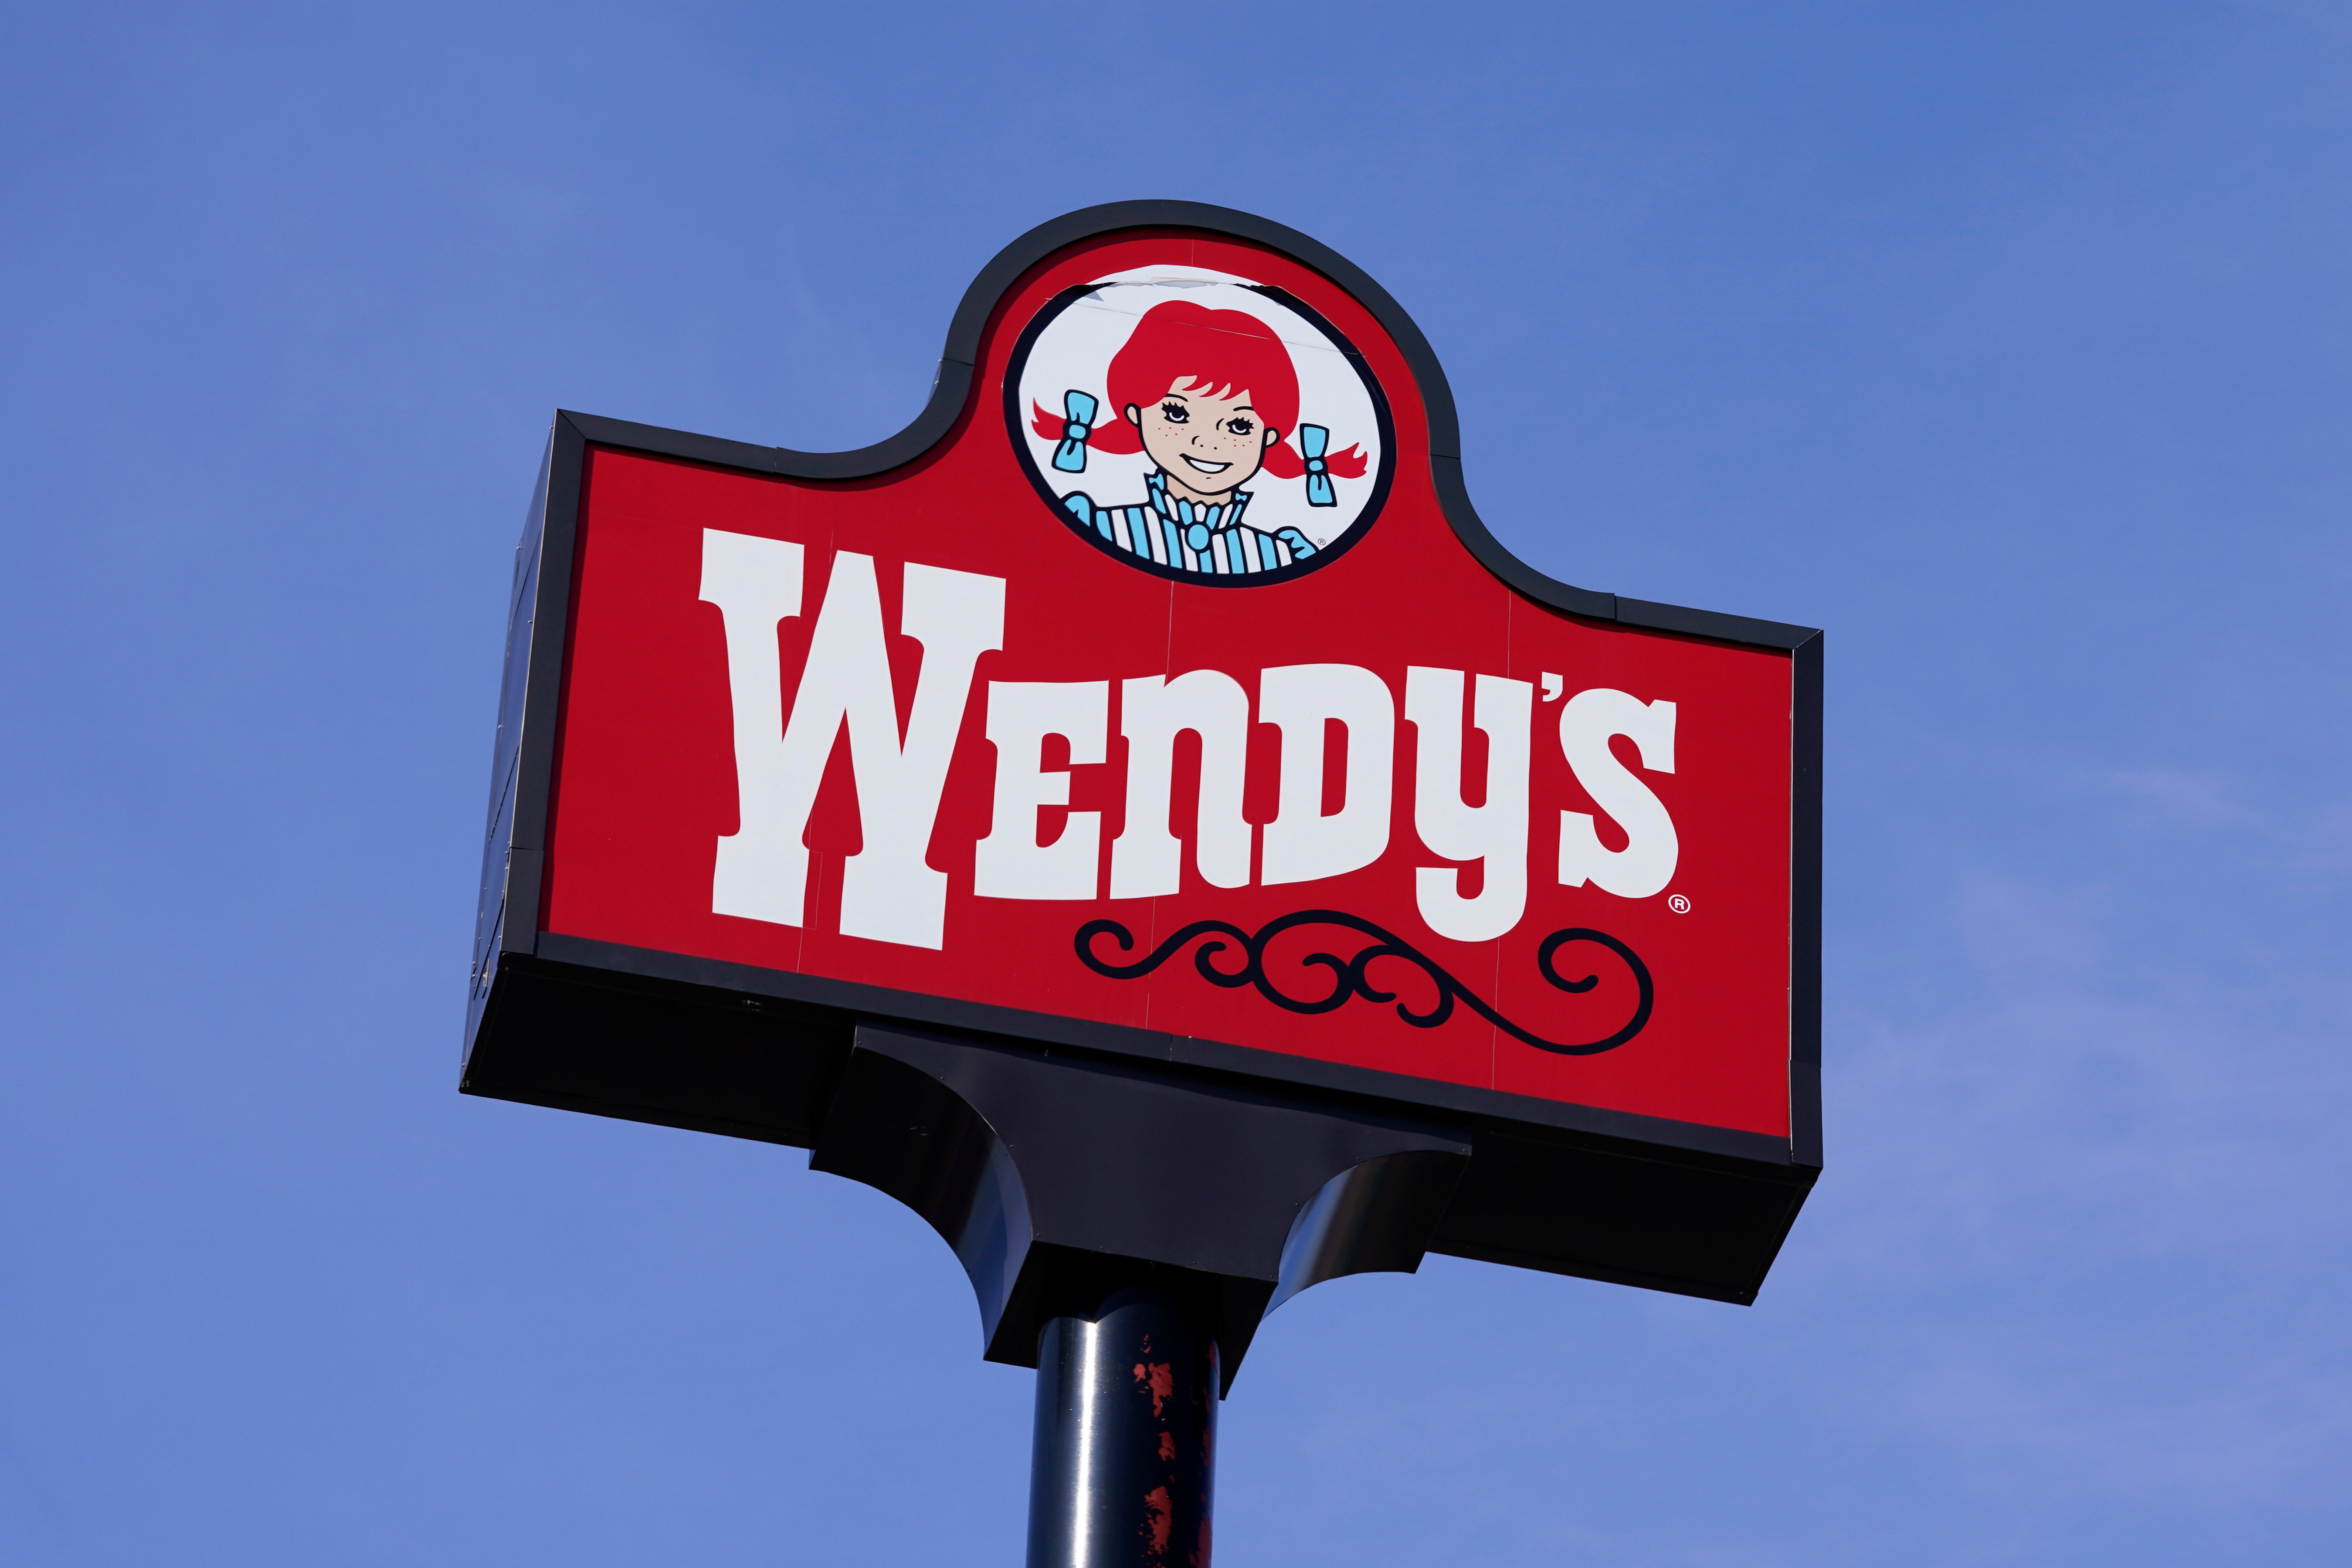 Wendy’s has pulled lettuce from its burgers due to an E. coli scare